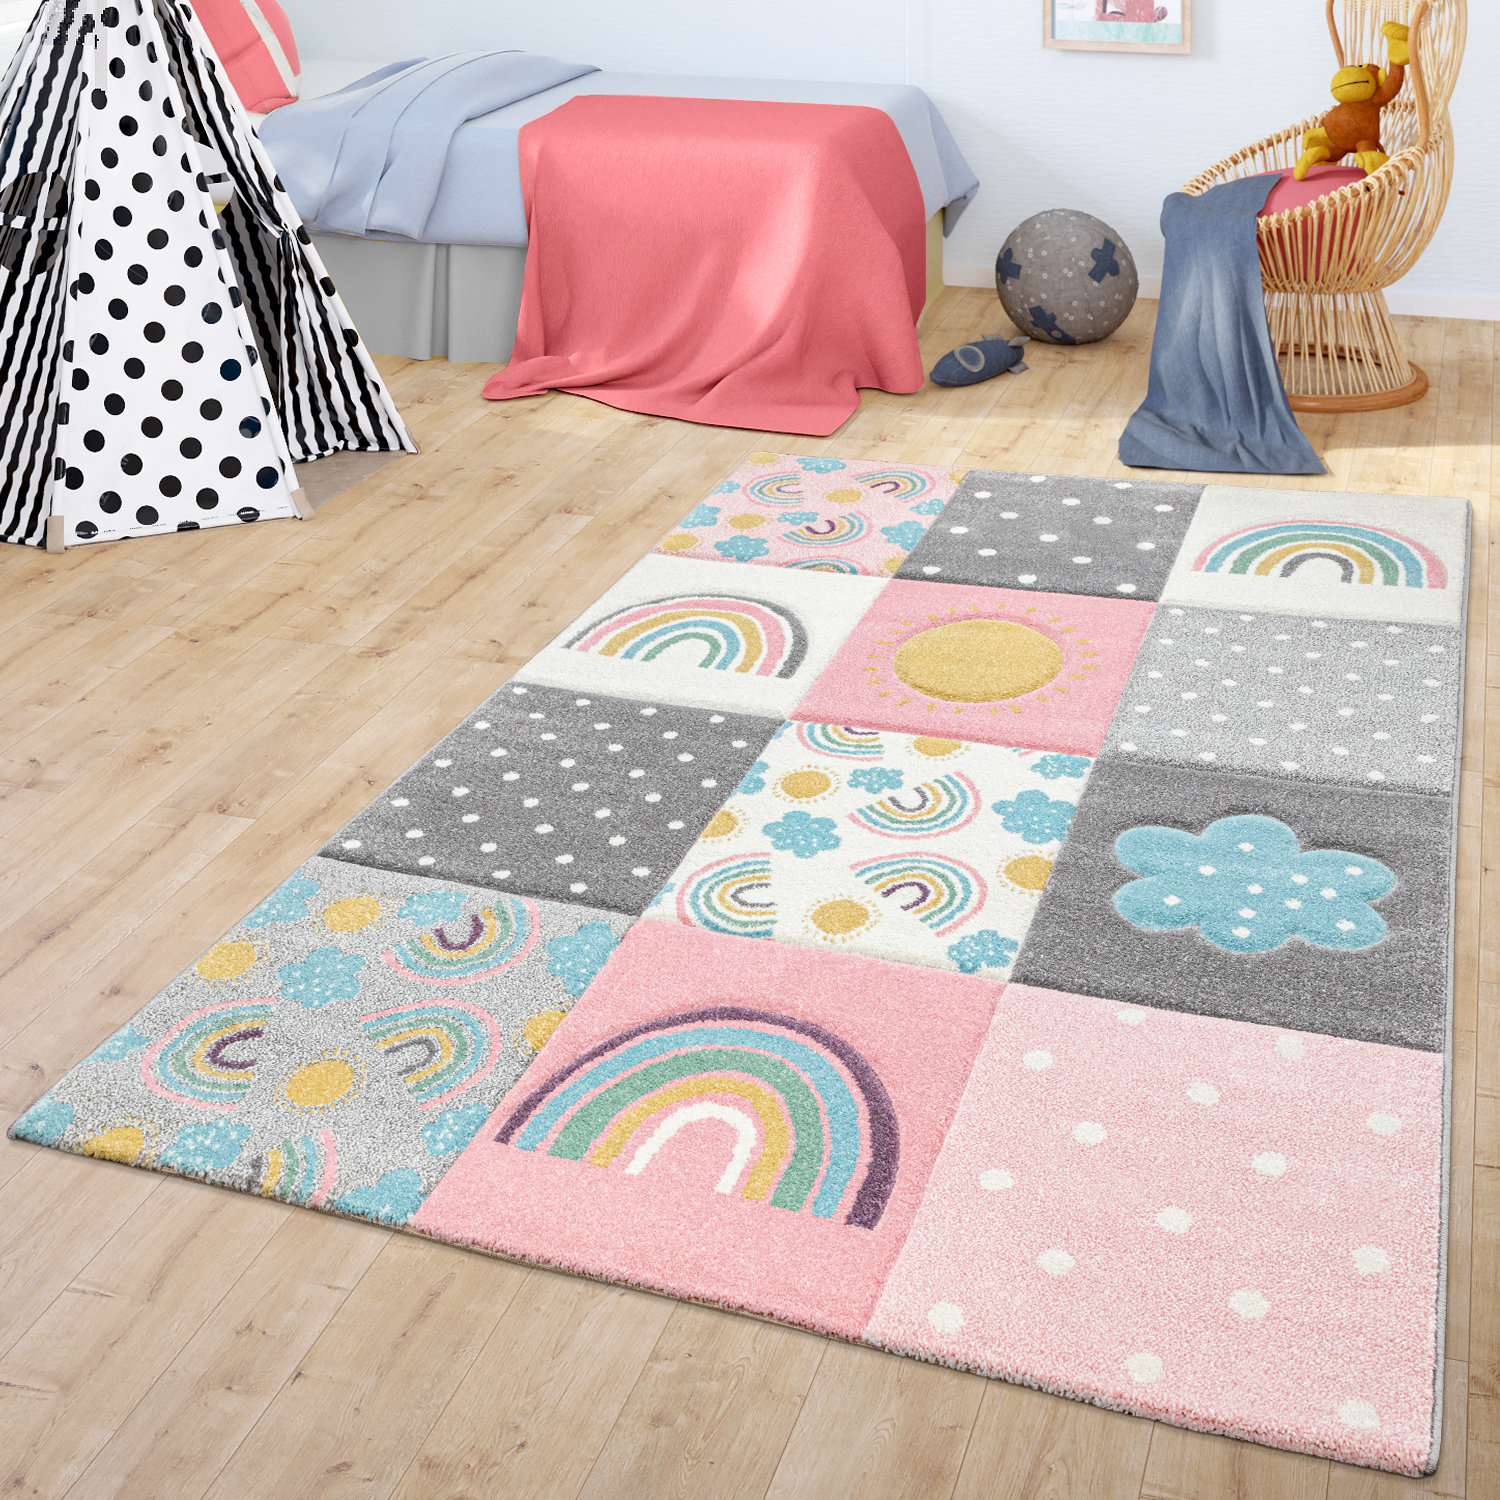 Colorful Kids Rug For Girls Room With Rainbows & Clouds In Pink